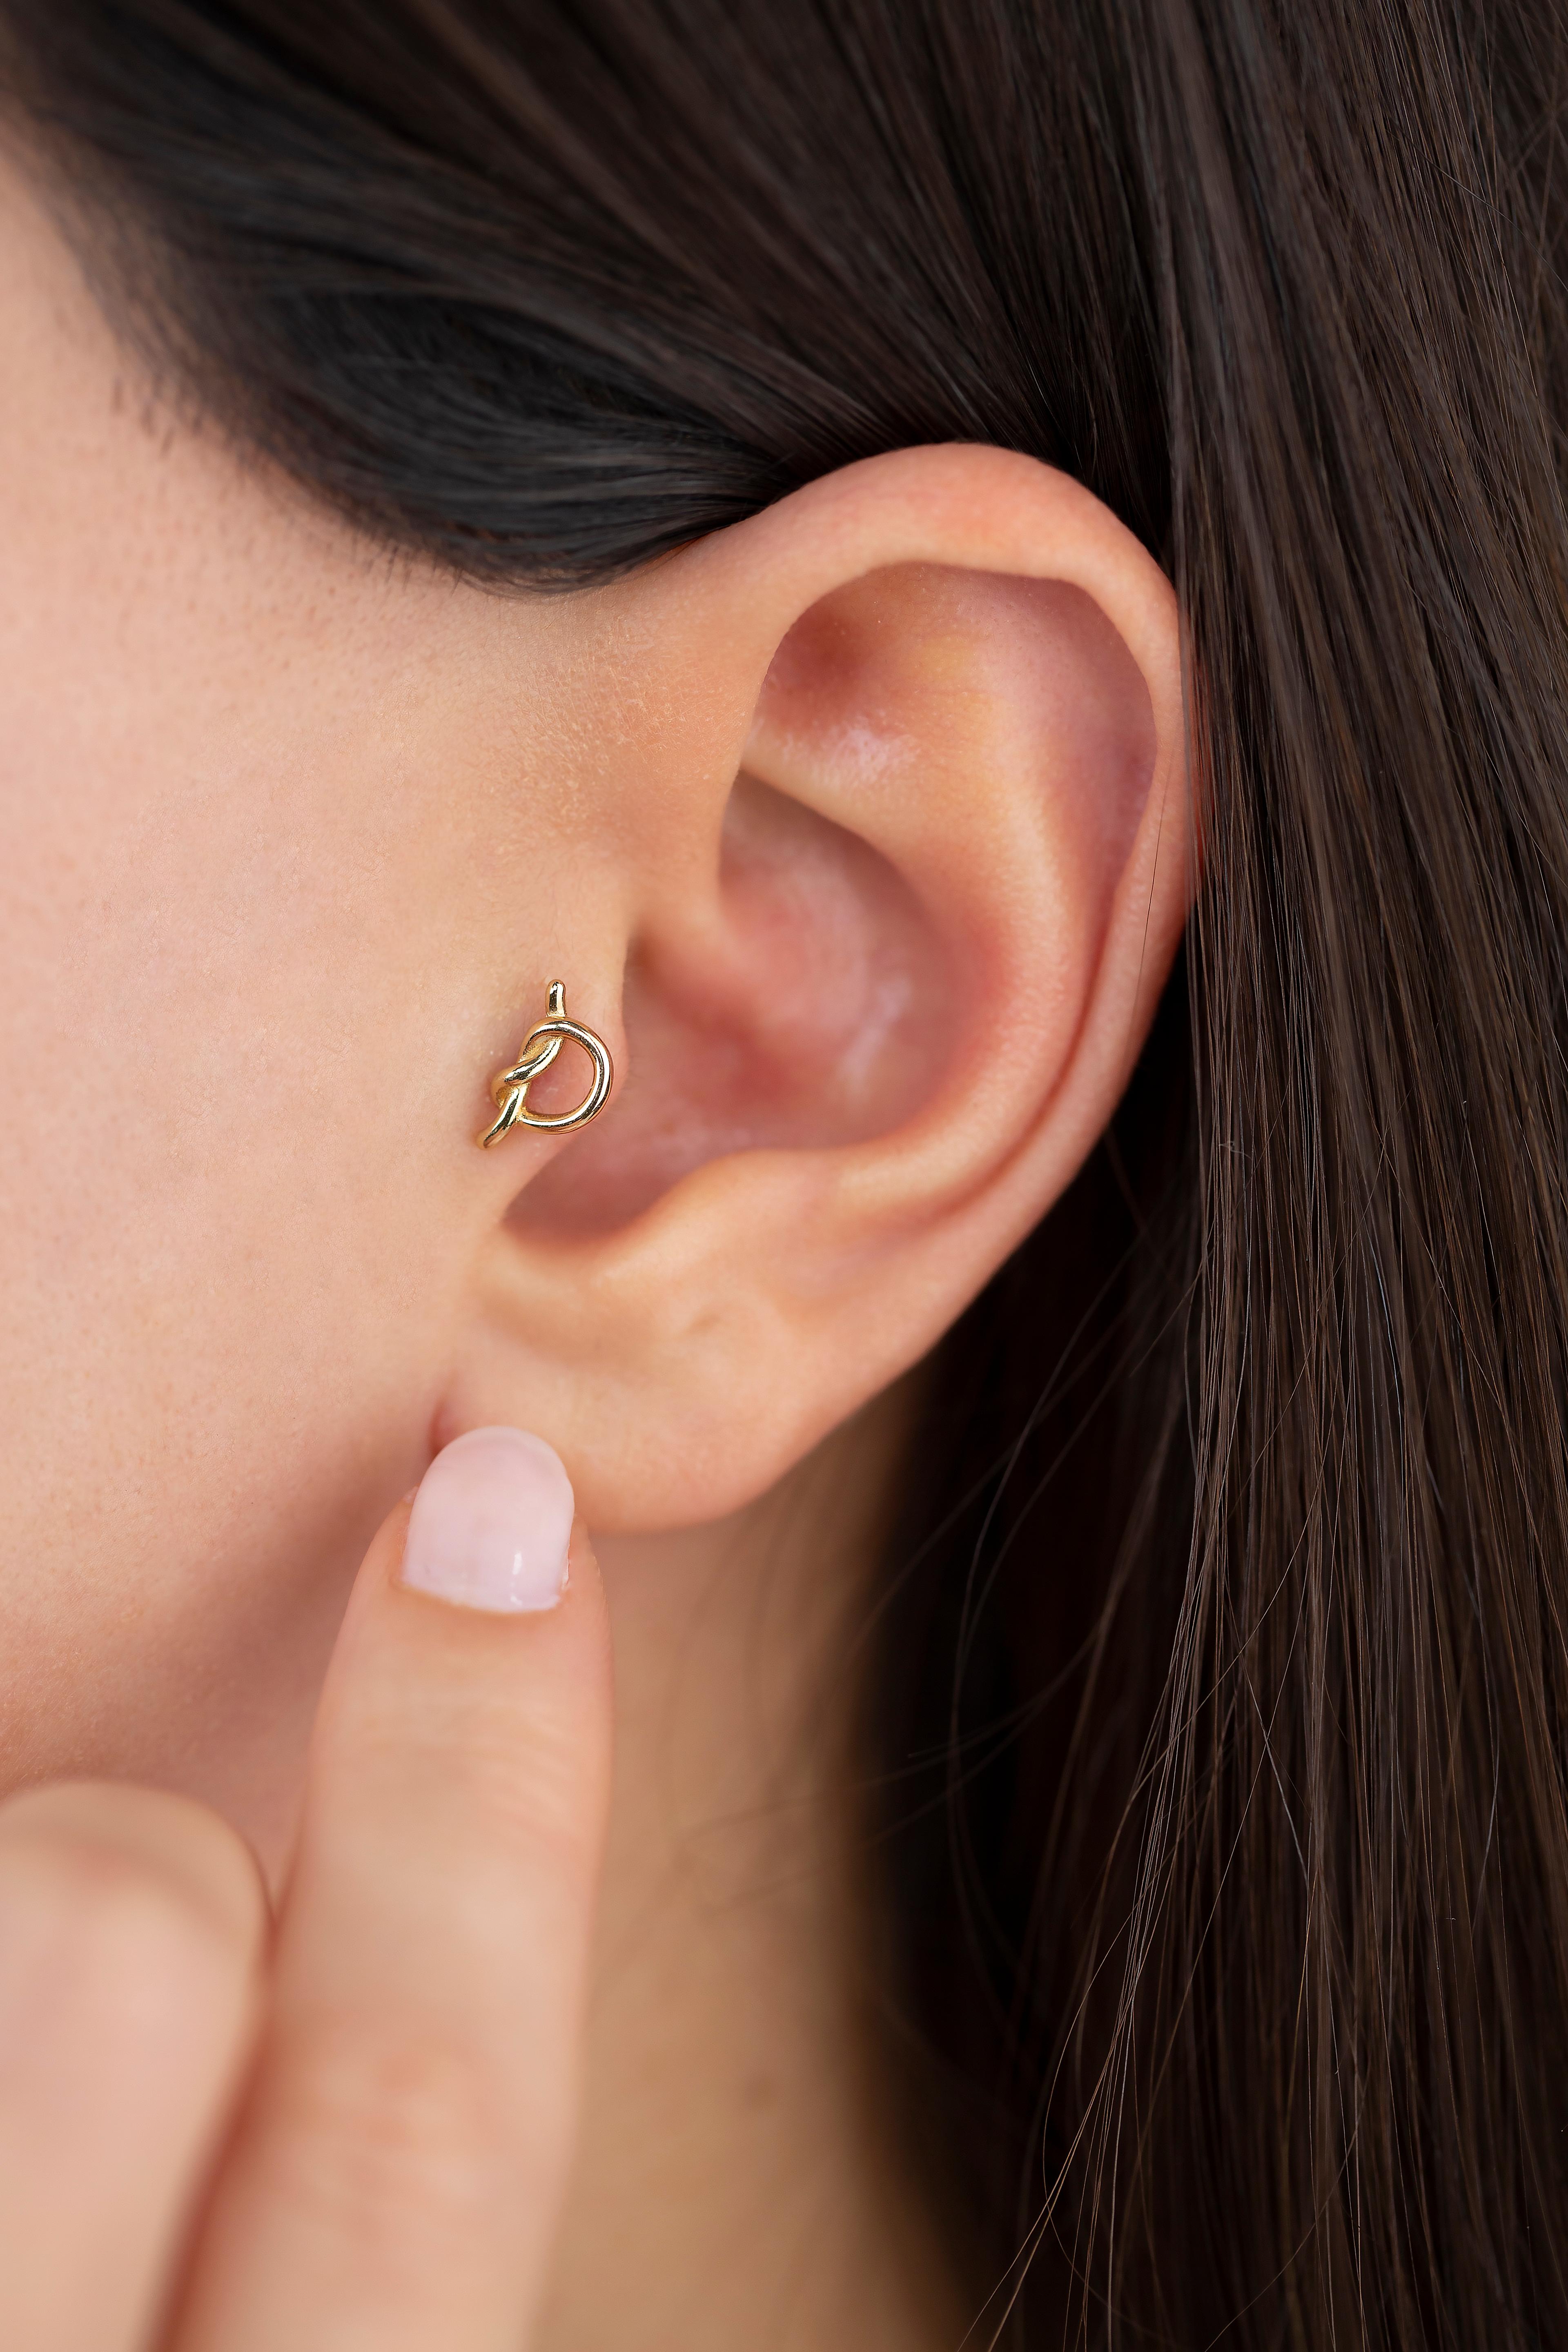 14K Gold Knot Piercing, Love Knot Gold Stud Earring

You can use the piercing as an earring too! Also this piercing is suitable for tragus, nose, helix, lobe, flat, medusa, monreo, labret and stud.

This piercing was made with quality materials and